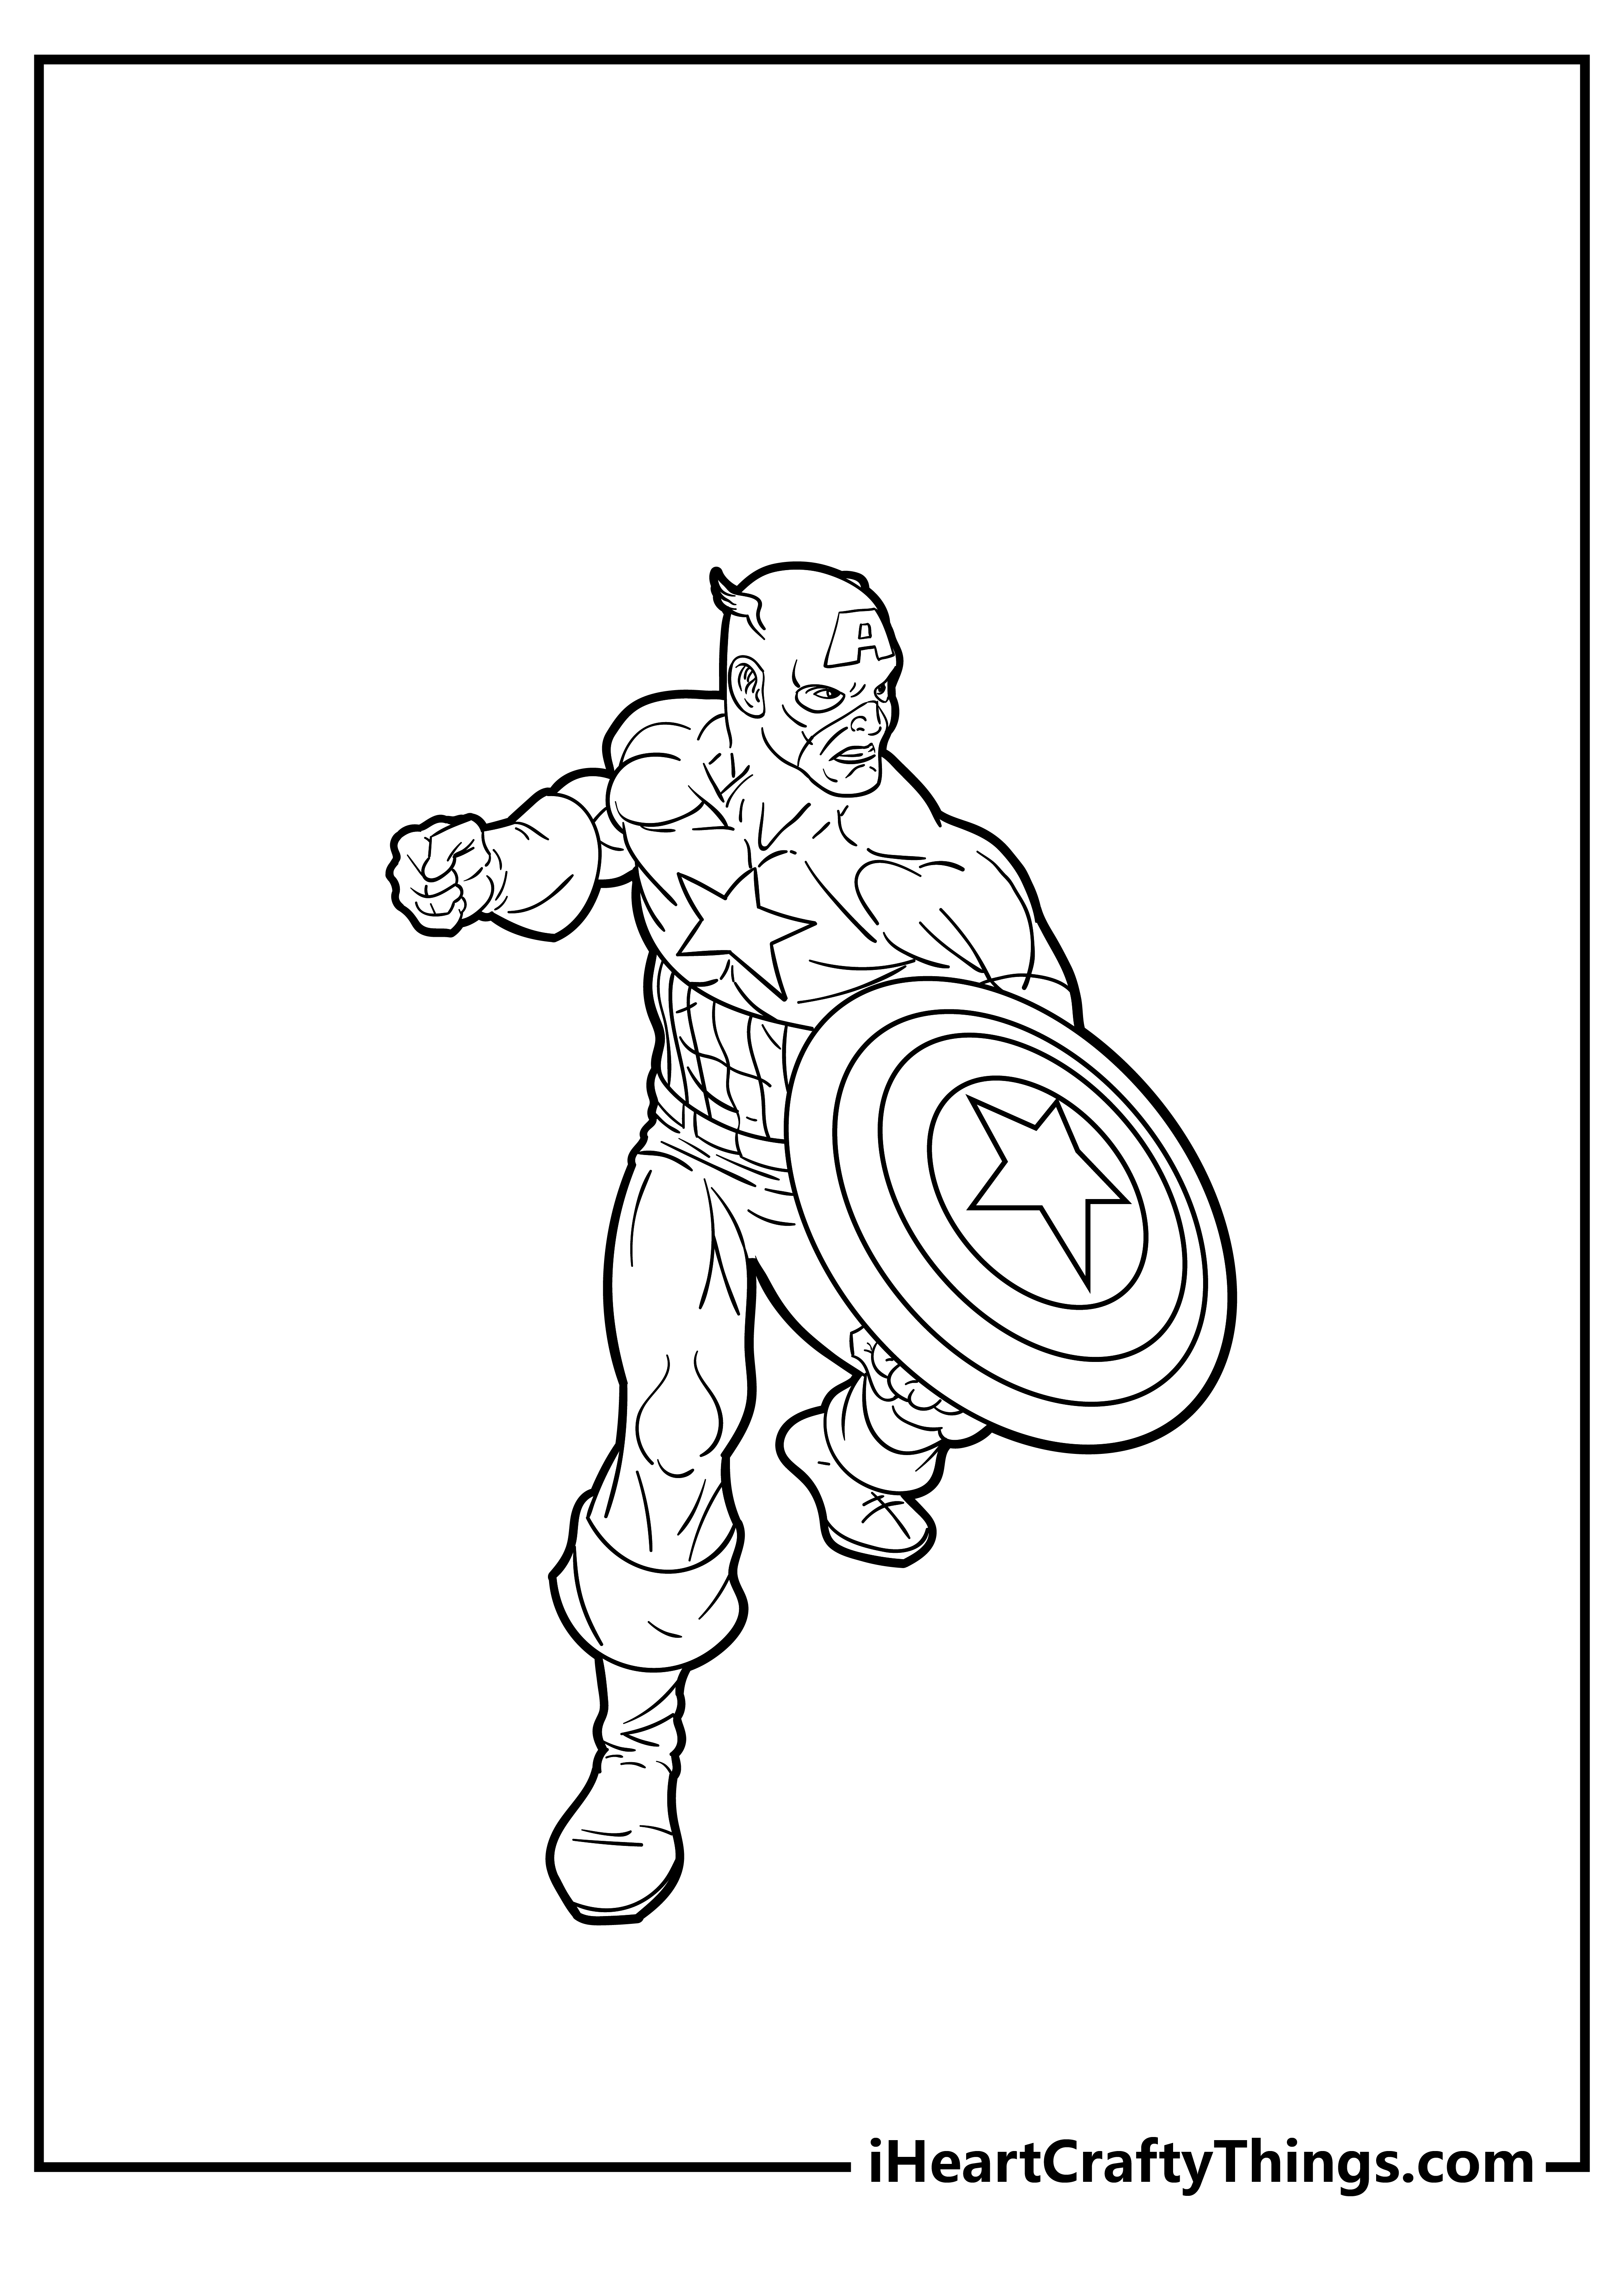 Captain America Coloring Pages for preschoolers free printable